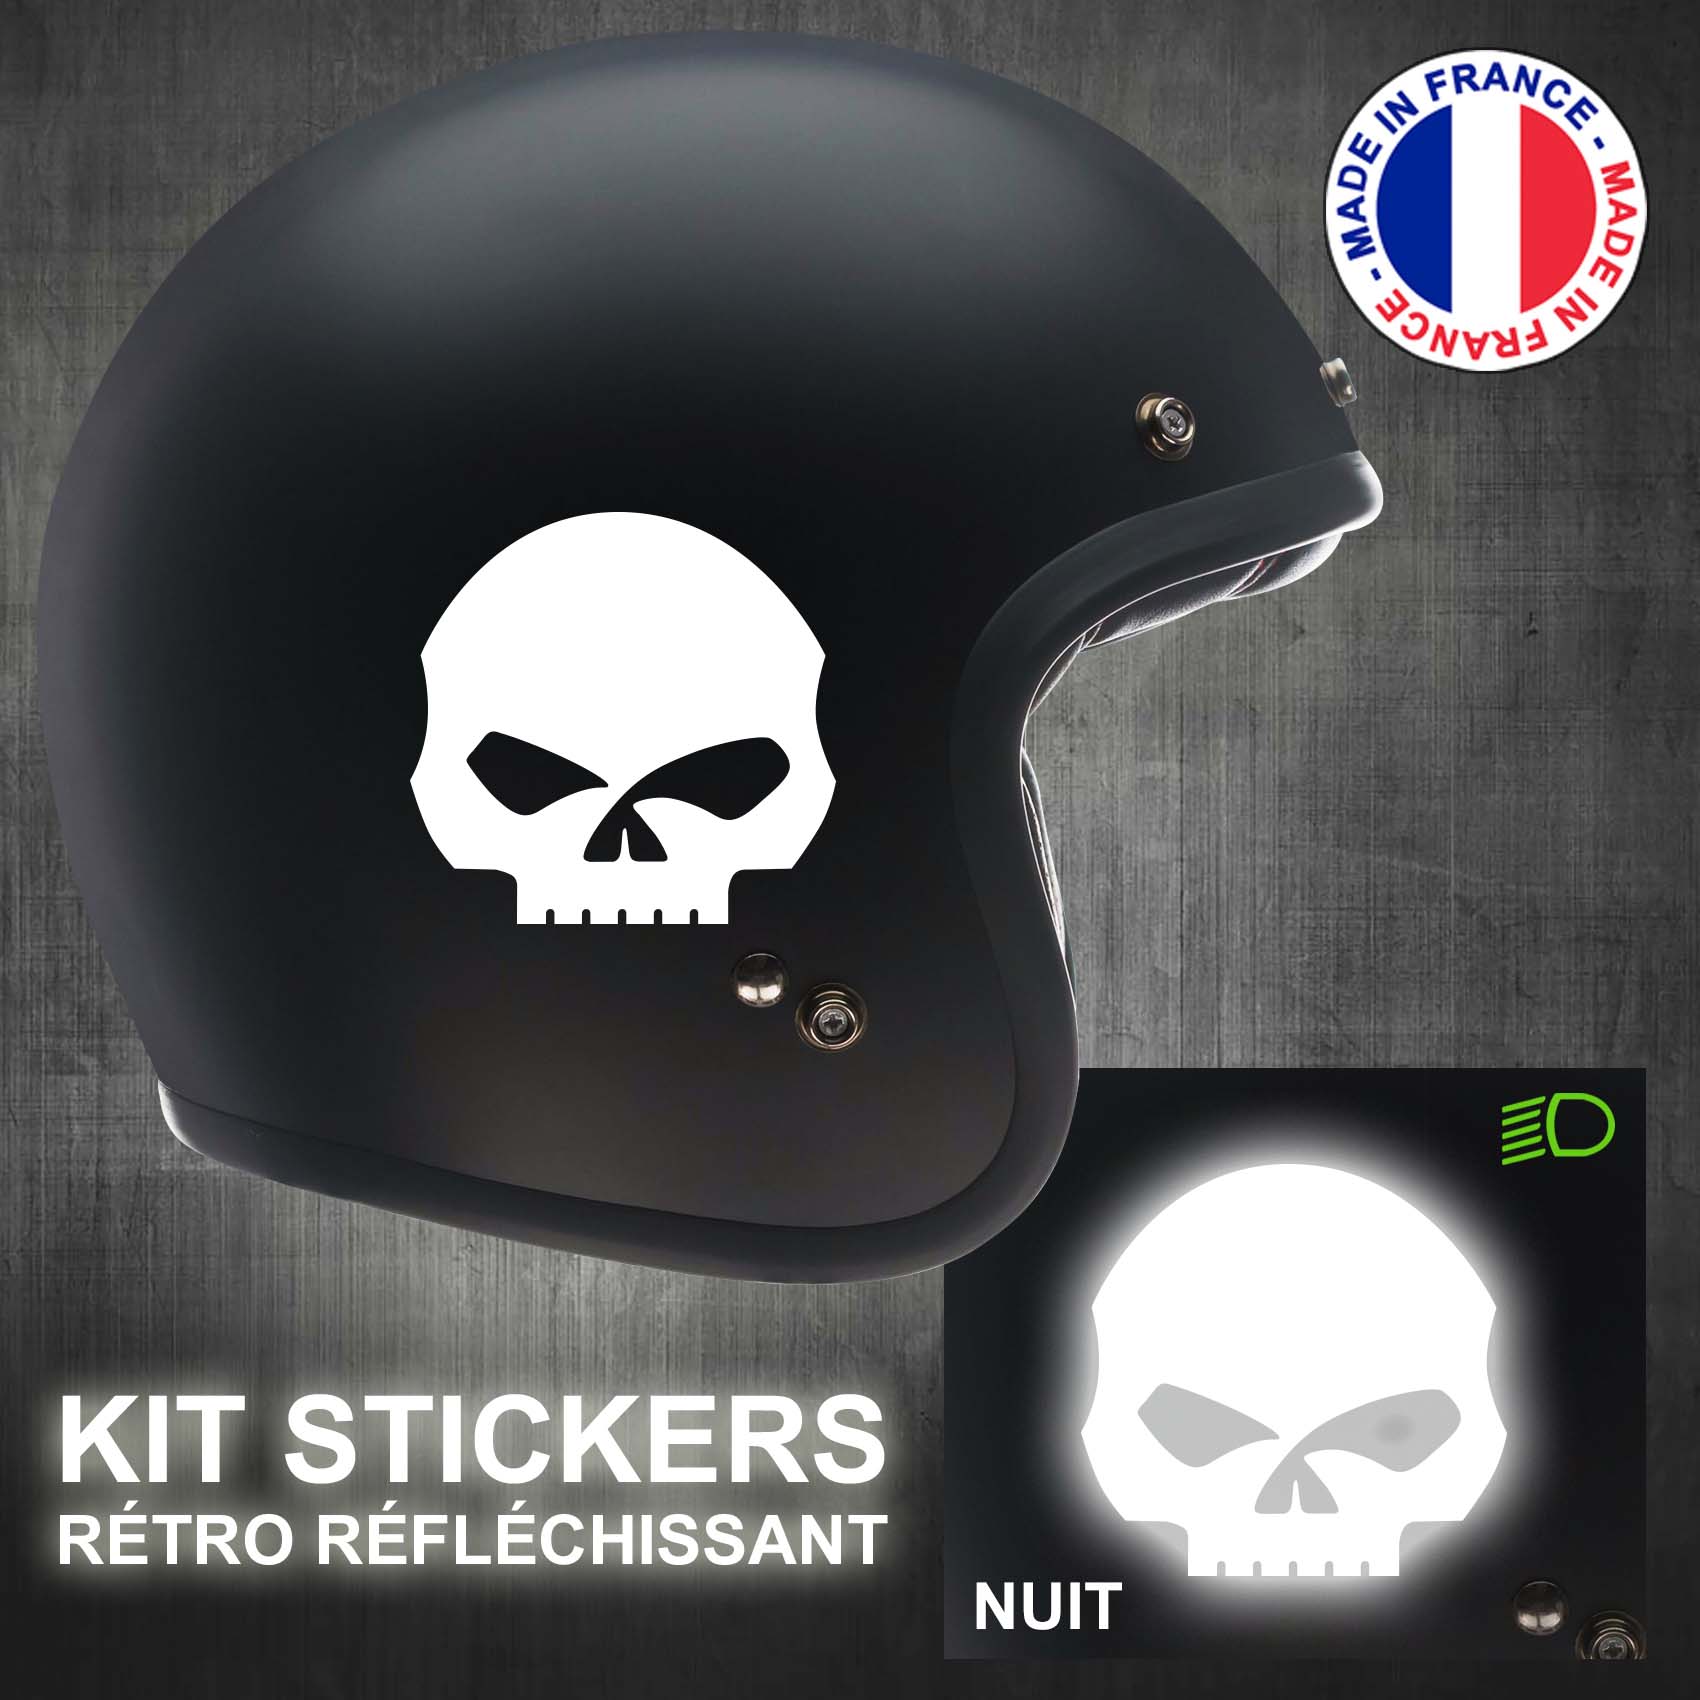 stickers-casque-moto-harley-davidson-ref6-retro-reflechissant-autocollant-noir-moto-velo-tuning-racing-route-sticker-casques-adhesif-scooter-nuit-securite-decals-personnalise-personnalisable-min